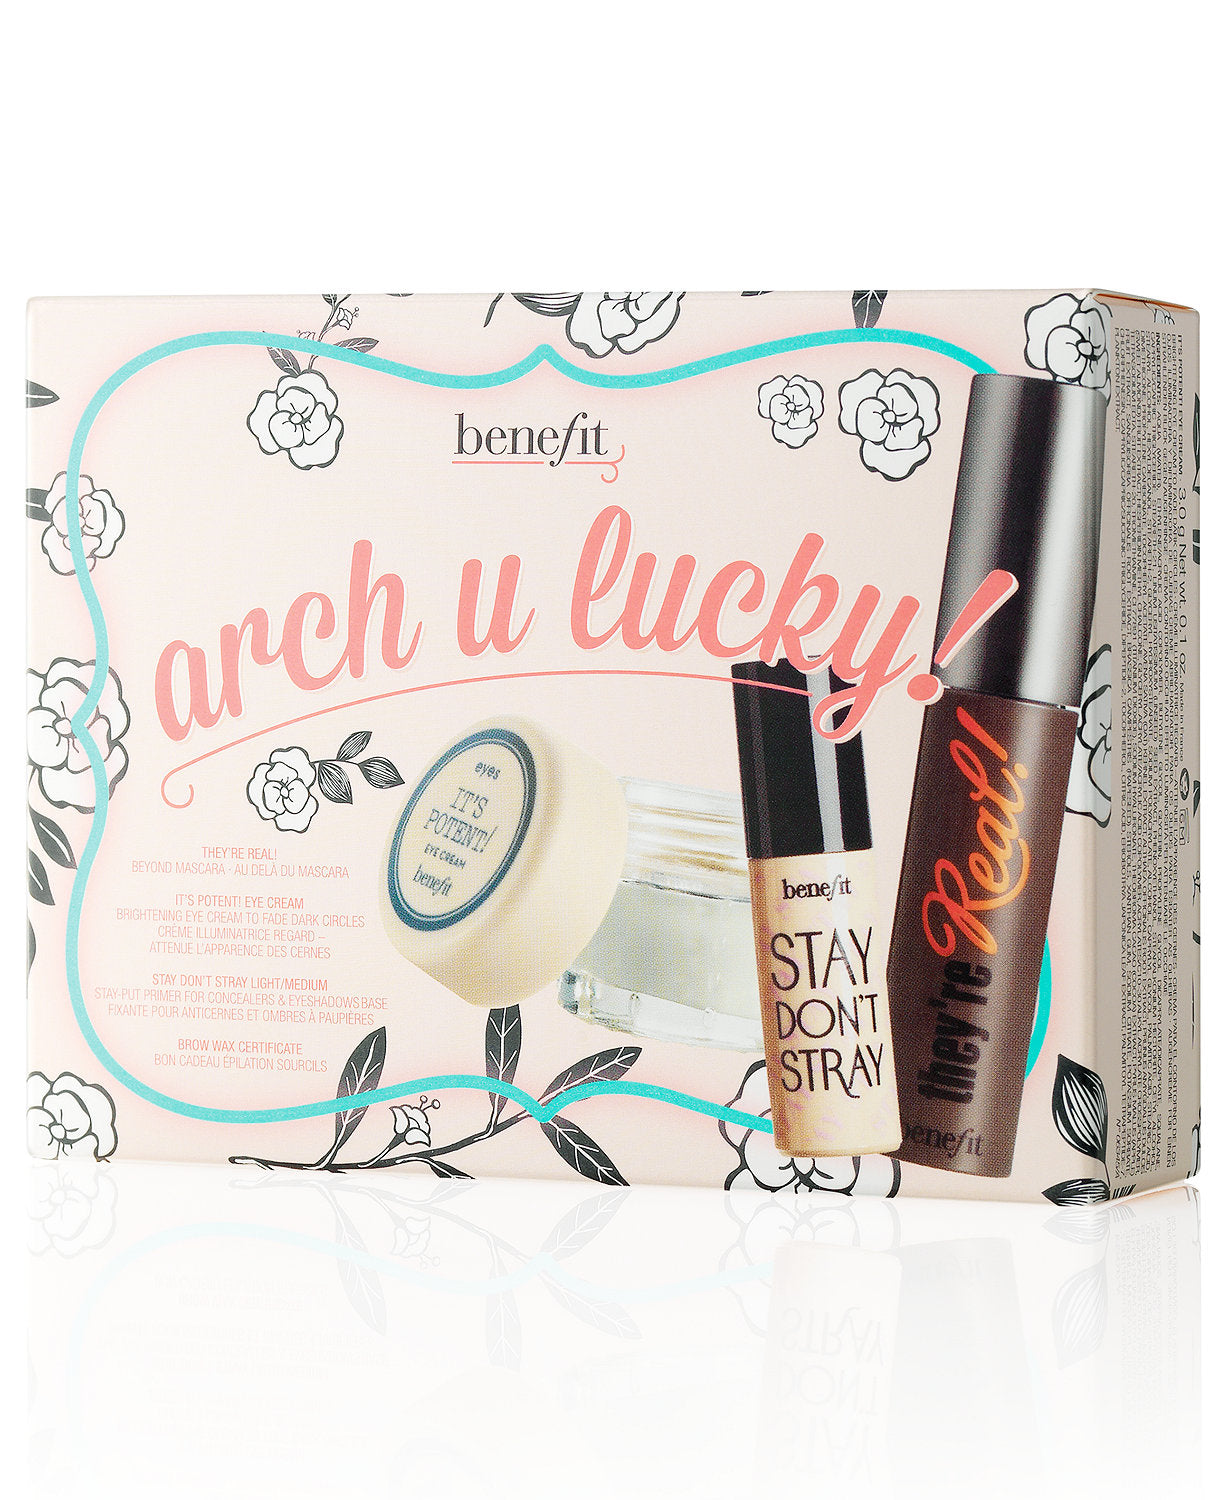 Benefit Arch u Lucky! Eye & Brow Set With Brow Wax New In Box